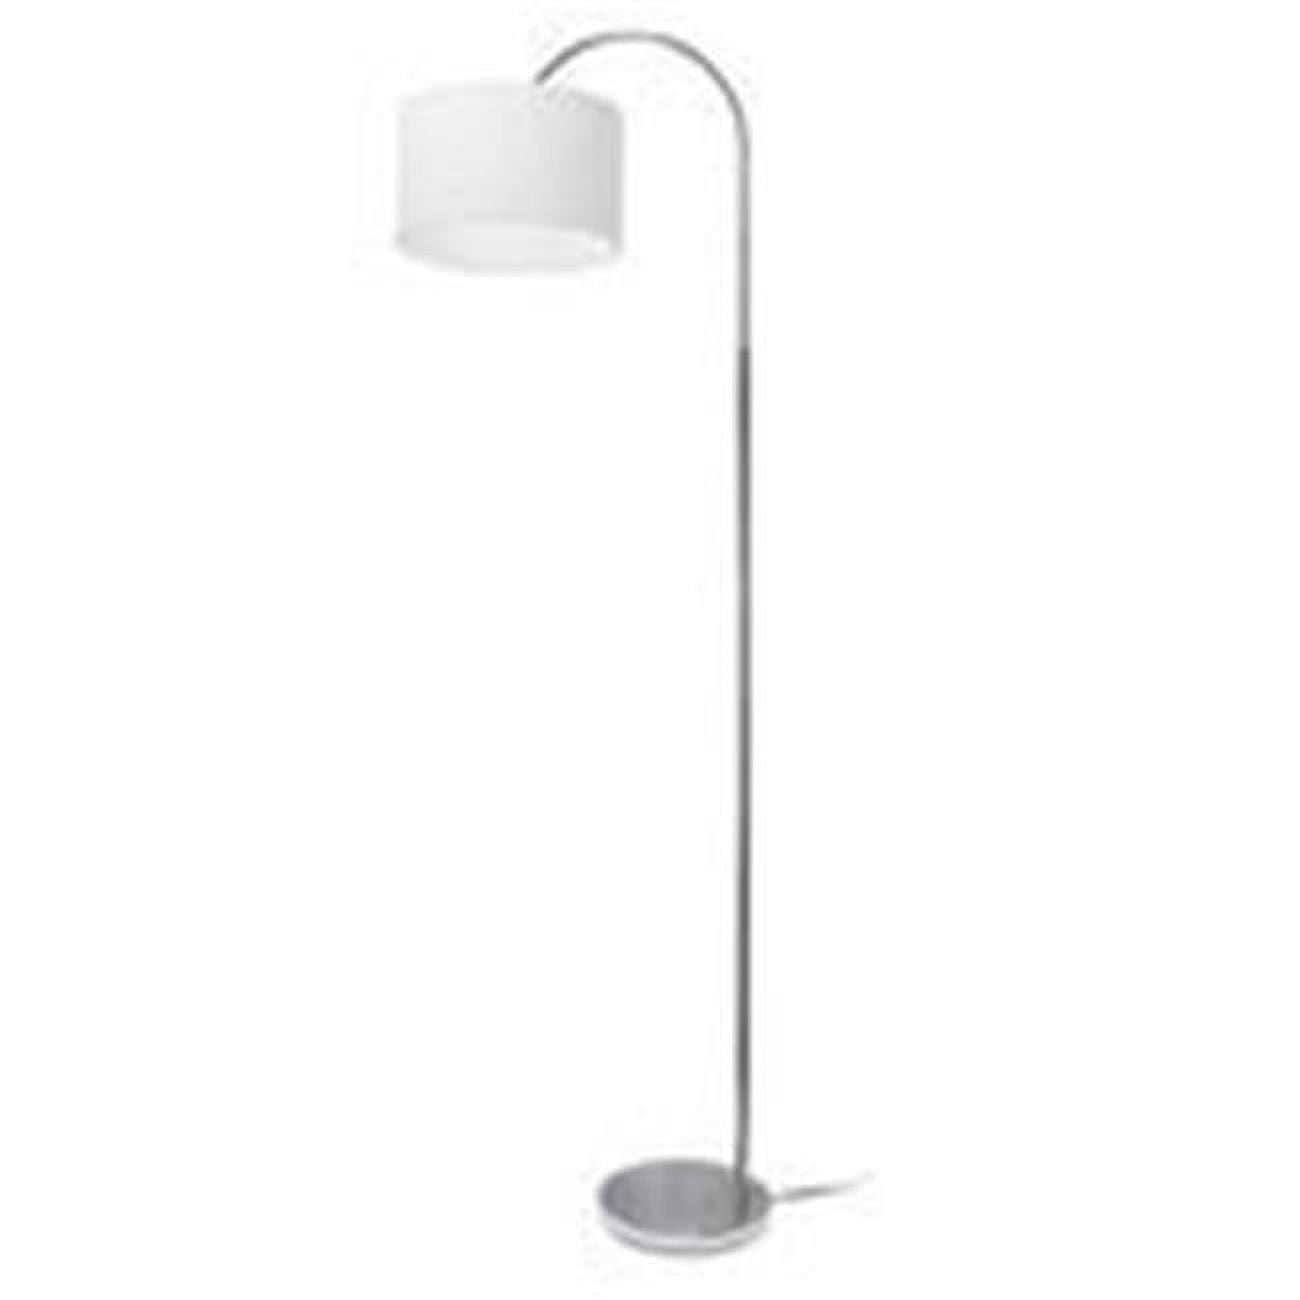 Alltherages Lf2005-wht Arched Floor Lamp Brushed Nickel Base & Pole With Tc White Shade